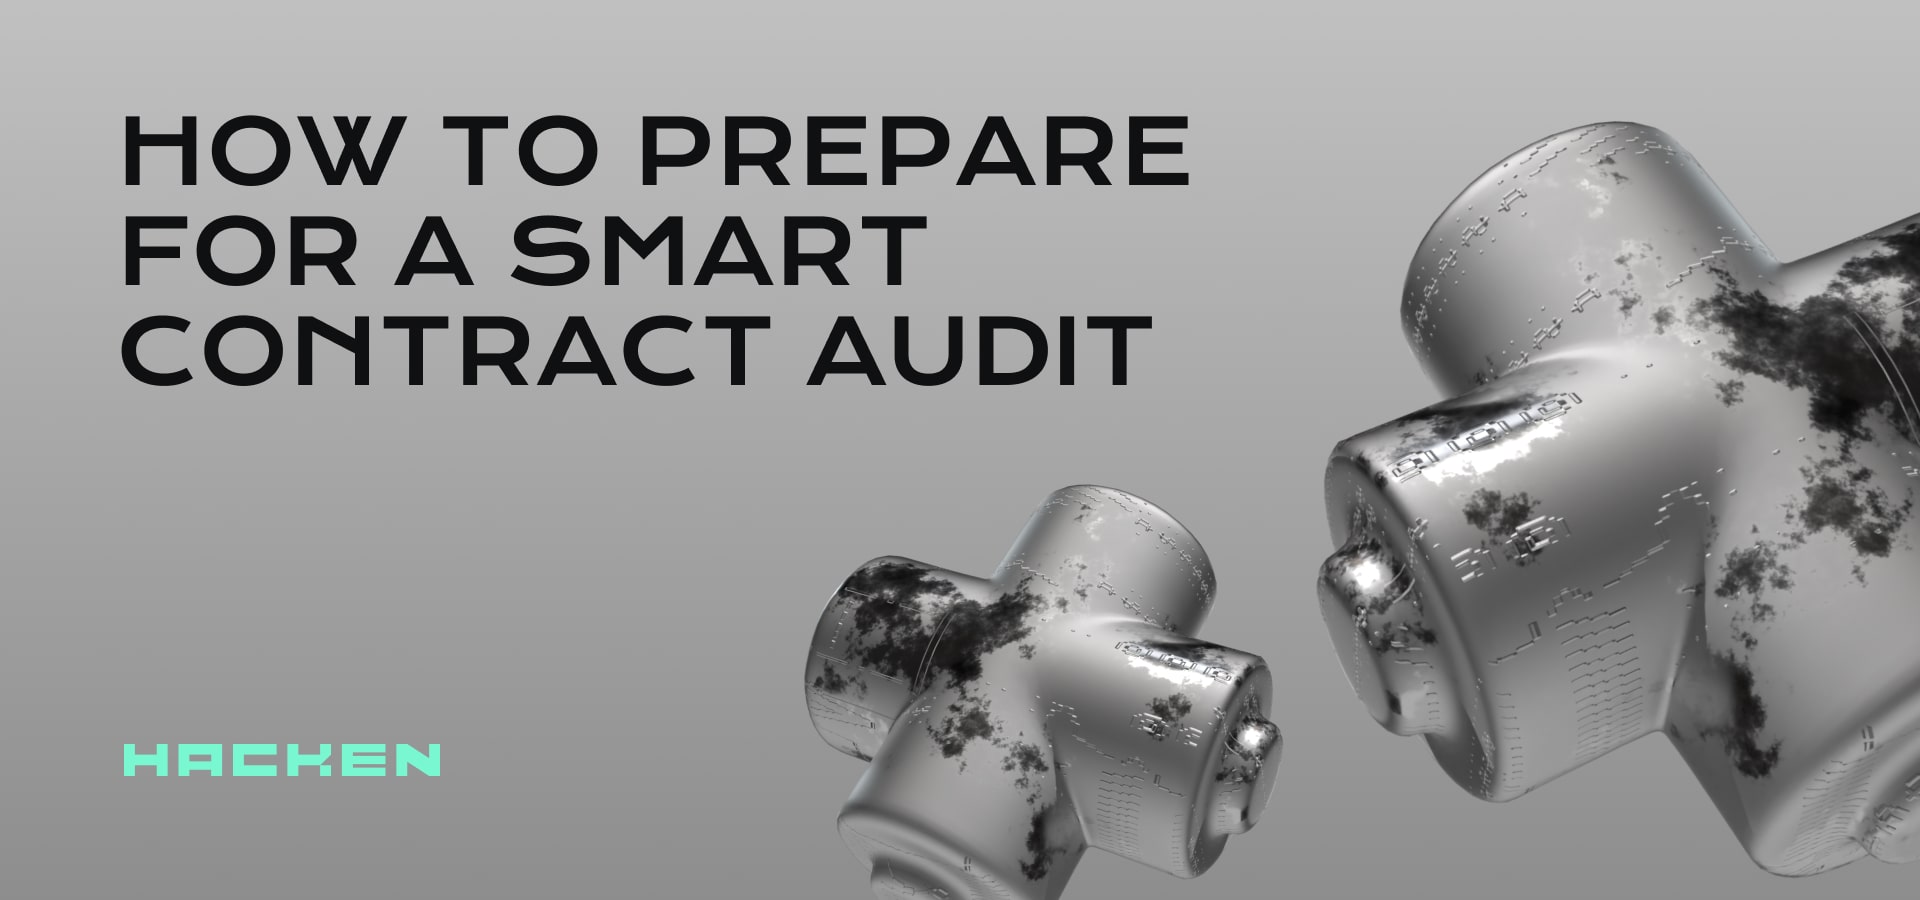 How to Prepare for a Smart Contract Audit